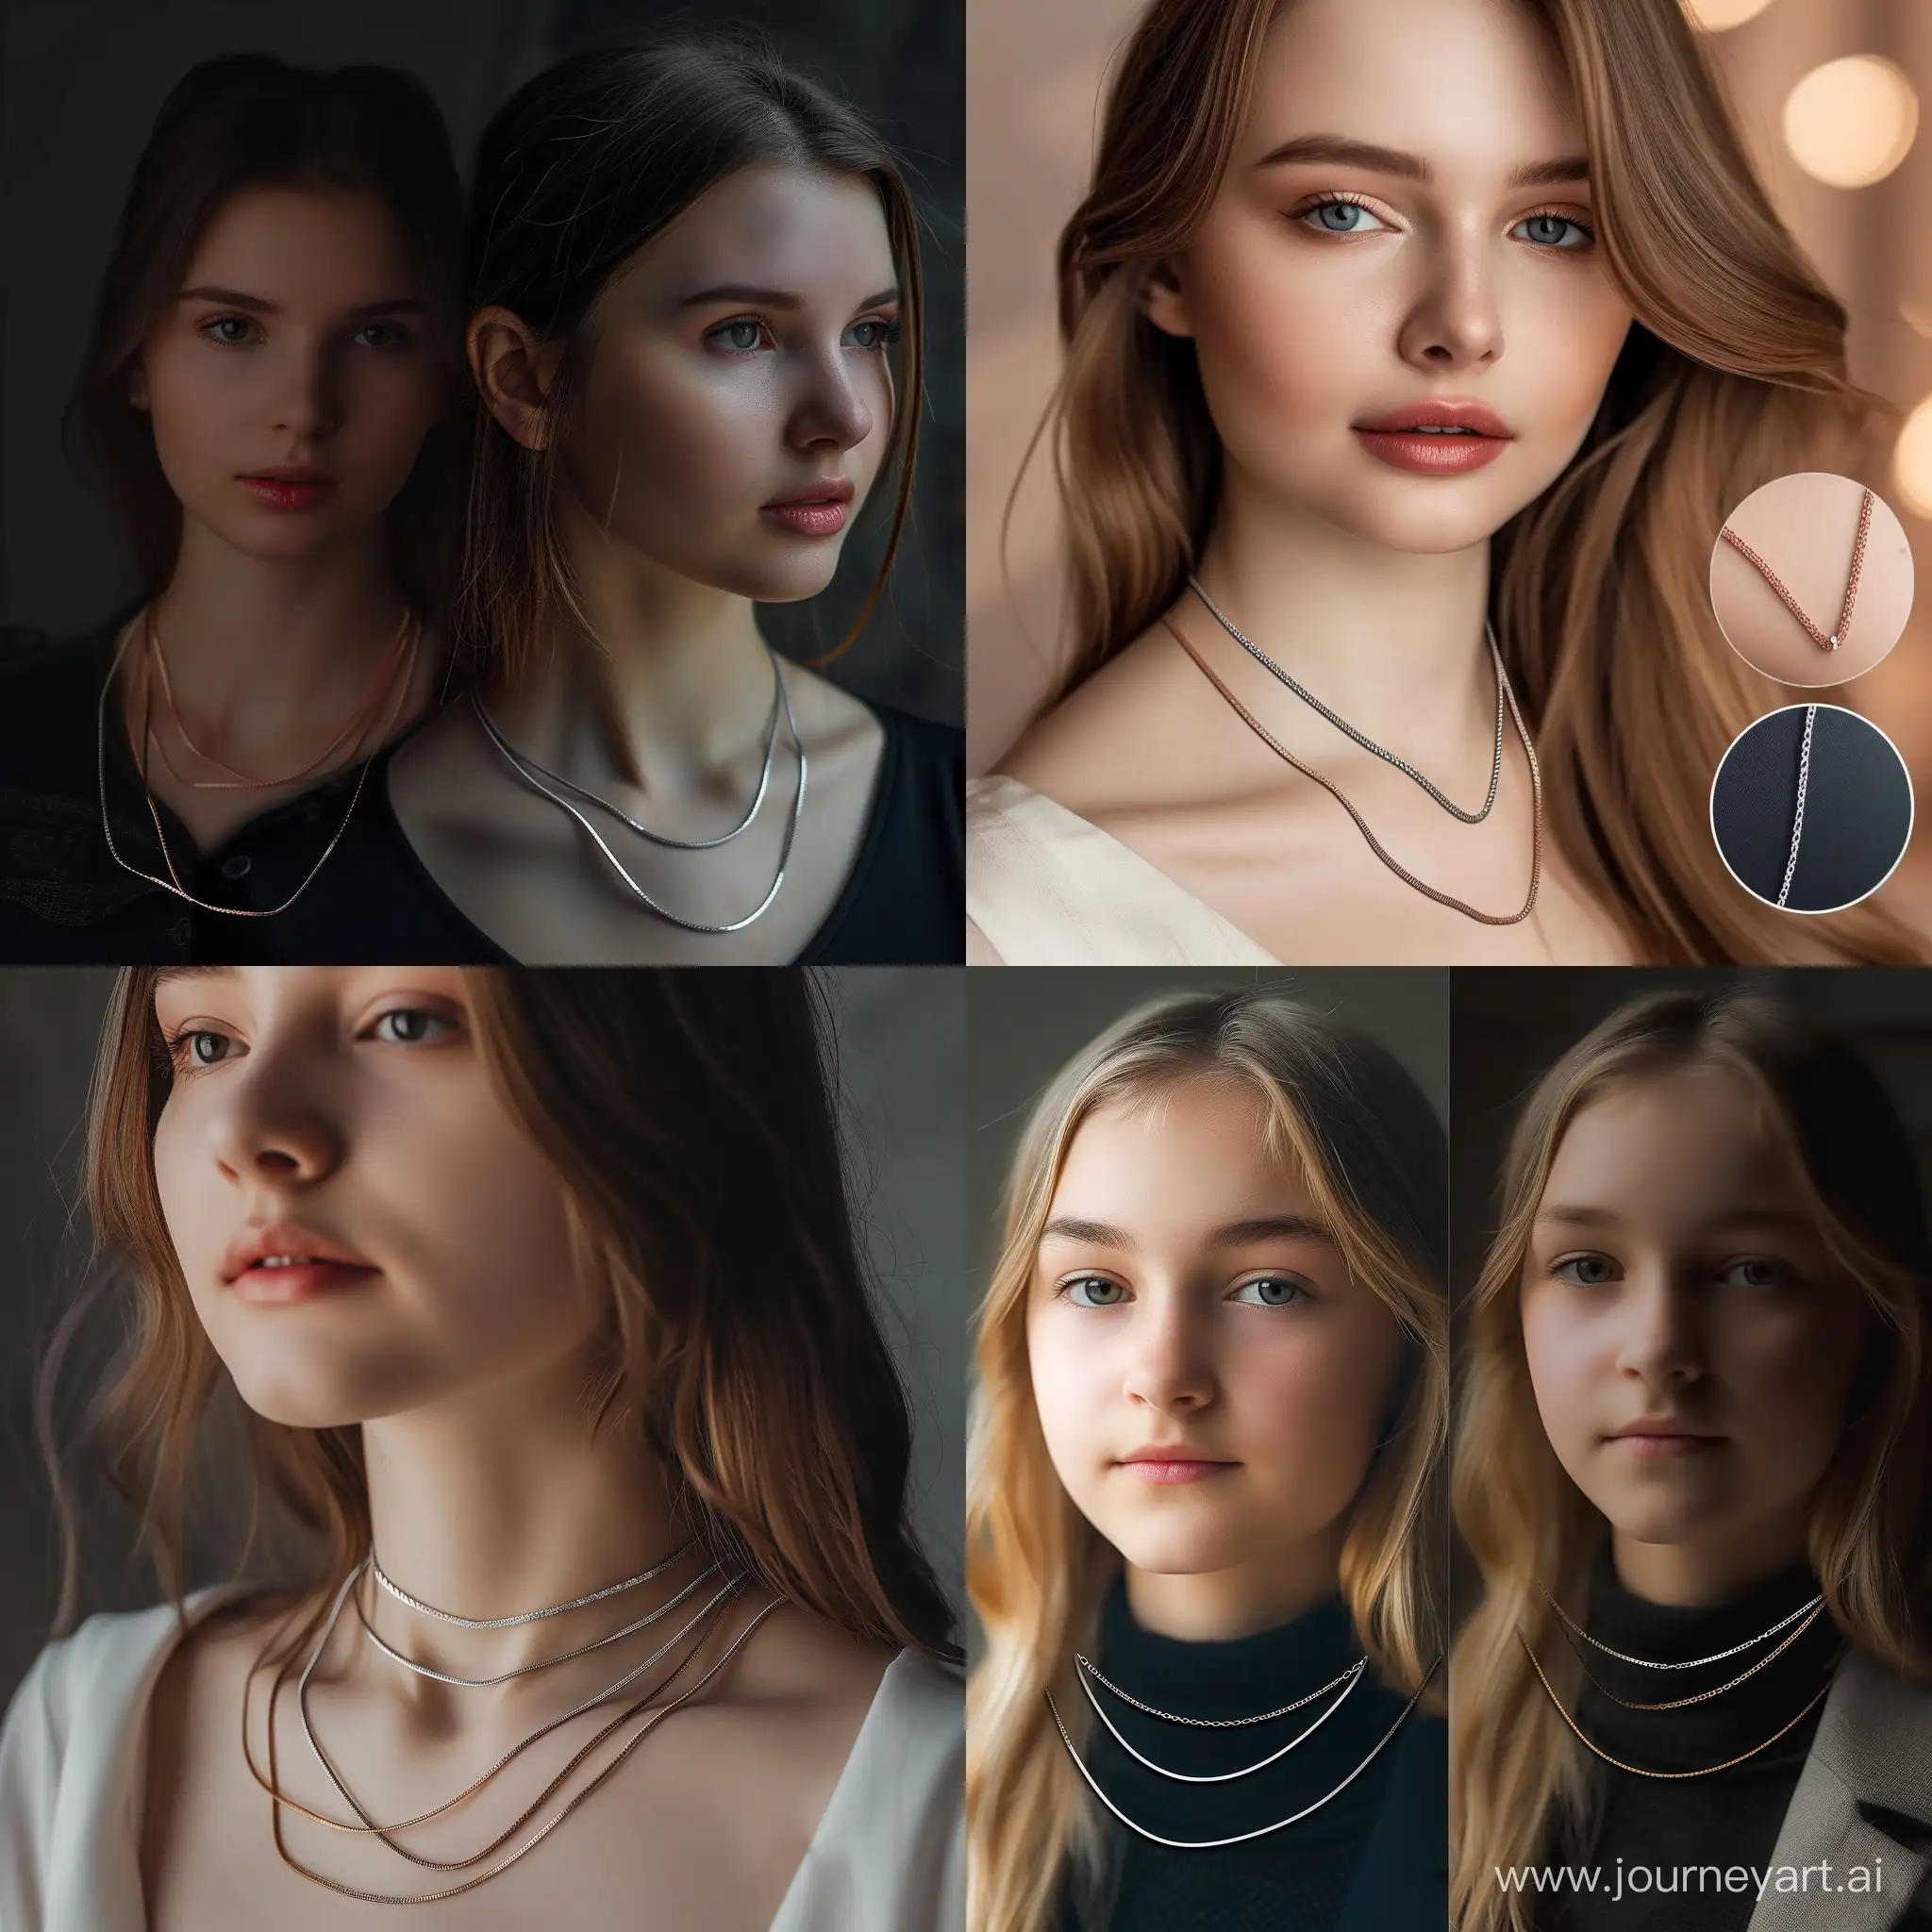 Stylish-Metal-Necklaces-Capturing-Elegance-in-a-Beautiful-Caucasian-Girls-Portrait